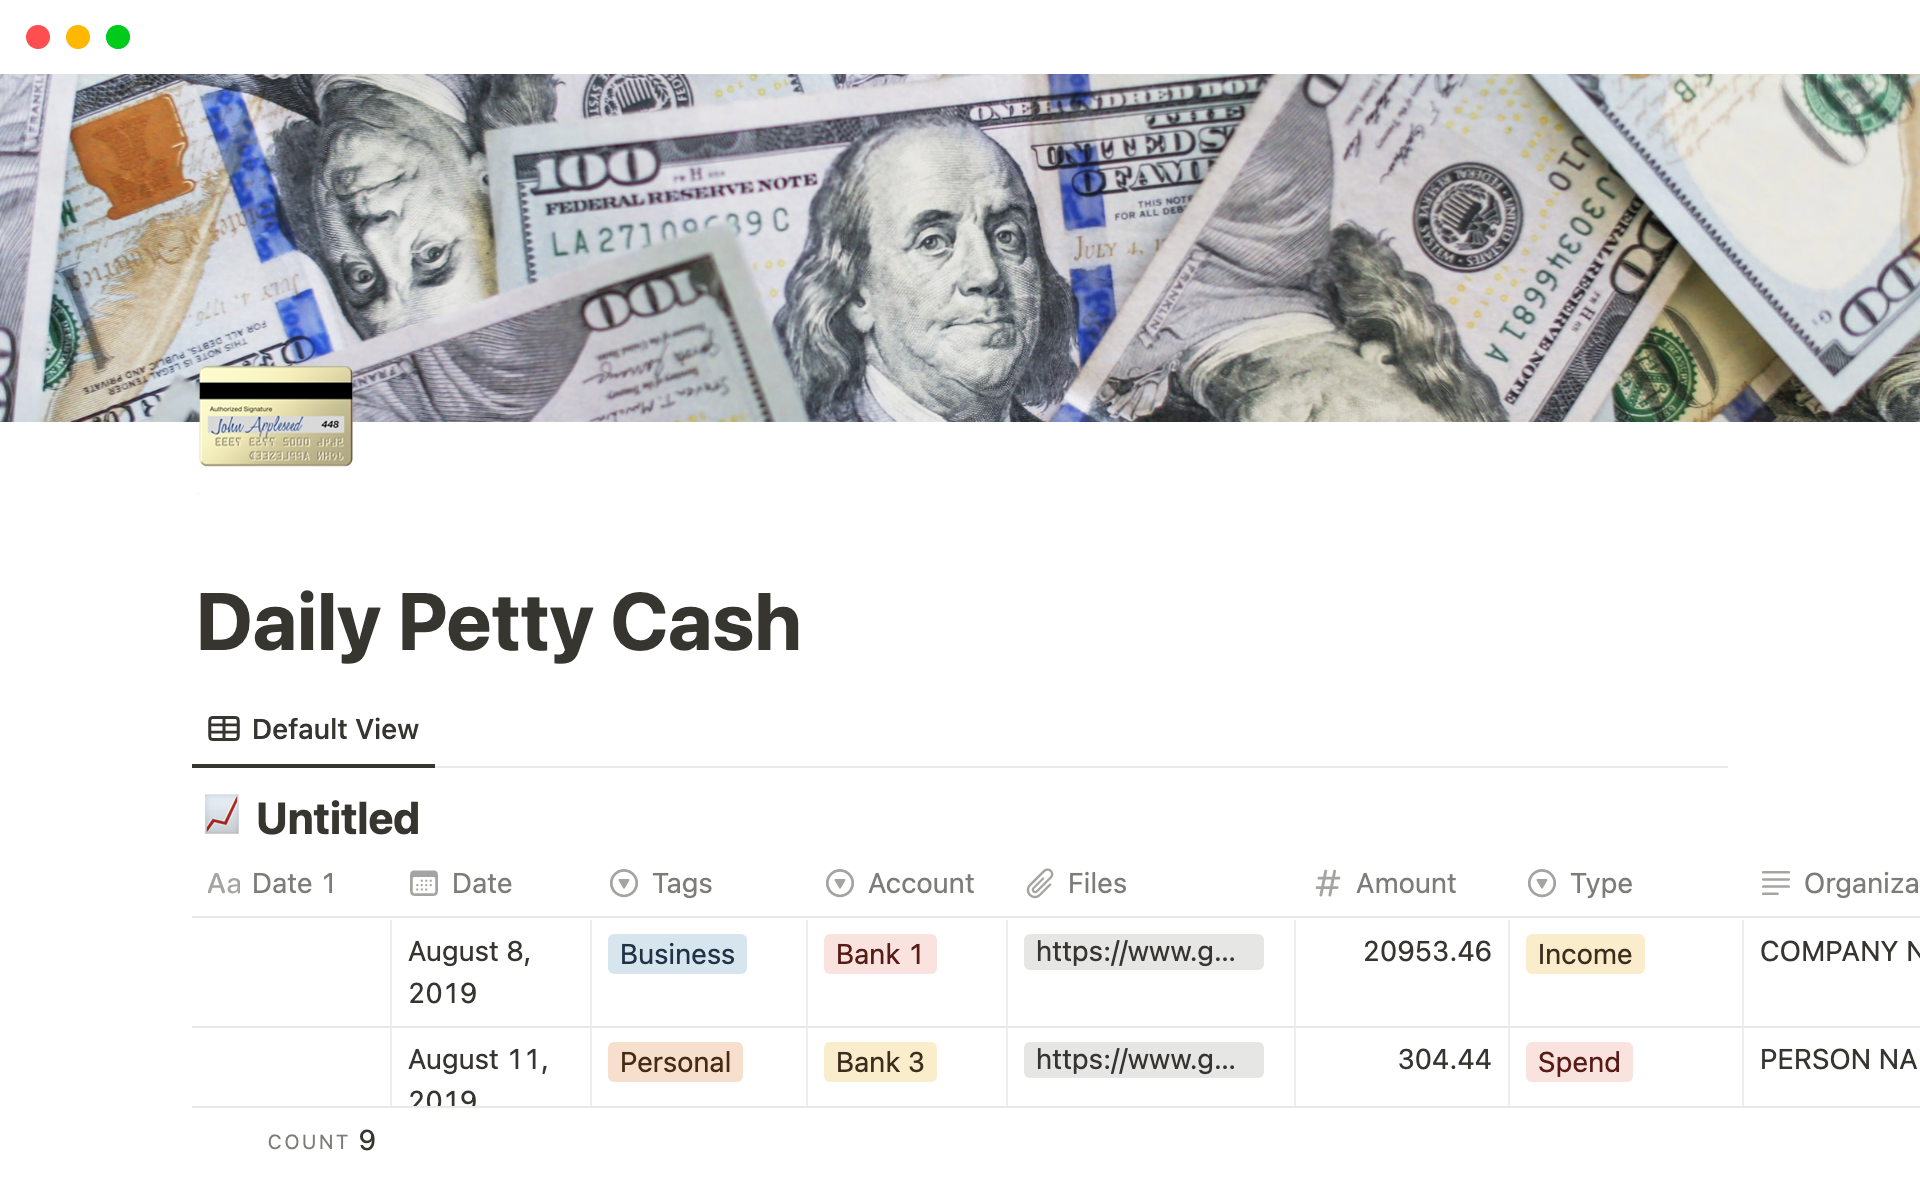 We understand the hassle of managing petty cash, which is why we've created our Daily Petty Cash Notion Template to simplify the process.